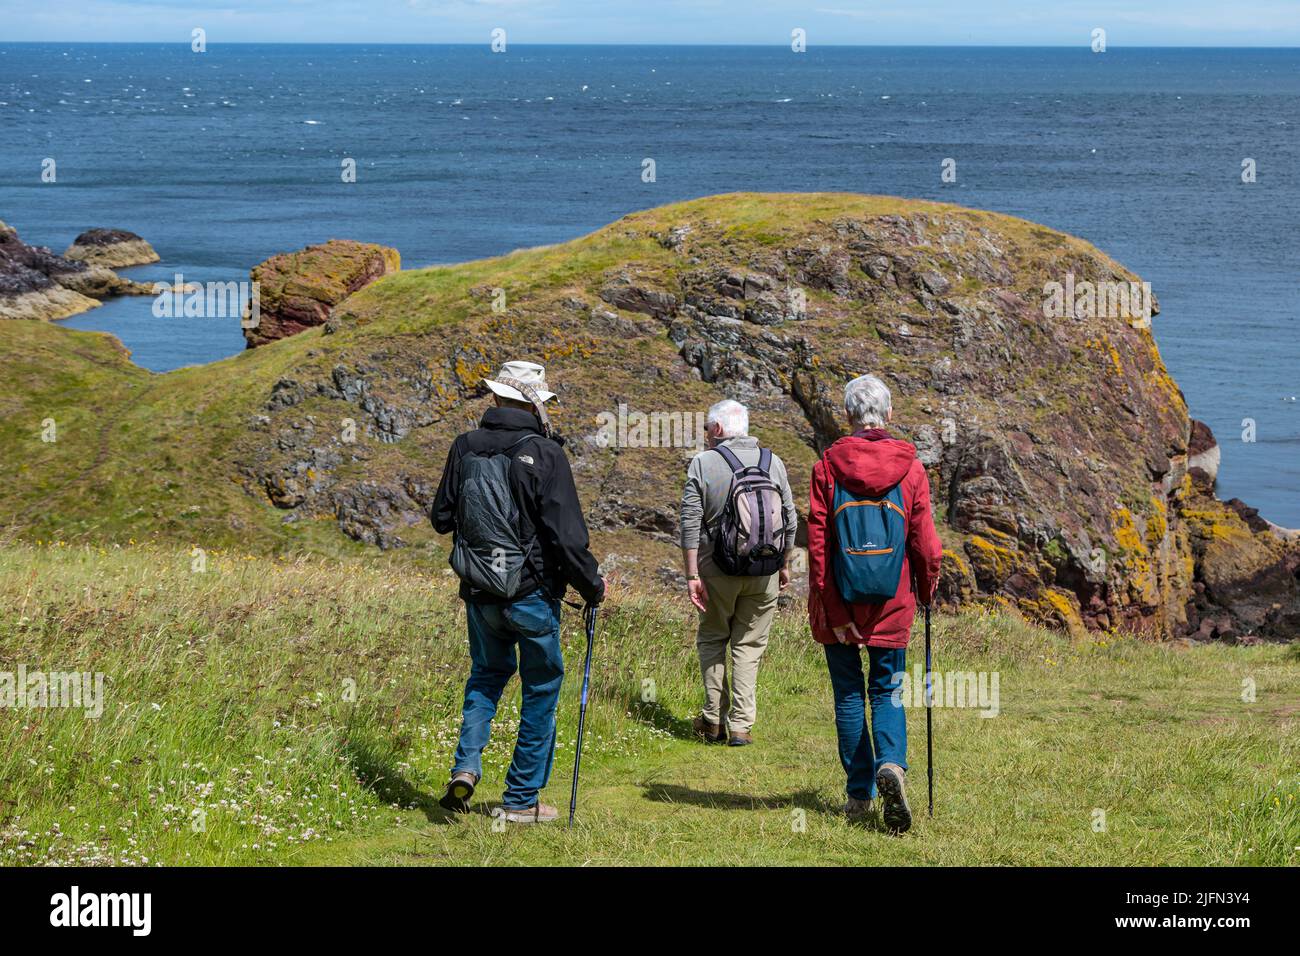 Berwickshire, Scotland, UK, 4th July 2022. UK Weather: strong wind and sunshine on the Berwickshire coastal path. Walkers enjoy the weather on the magnificent clifftop coastal path route Stock Photo